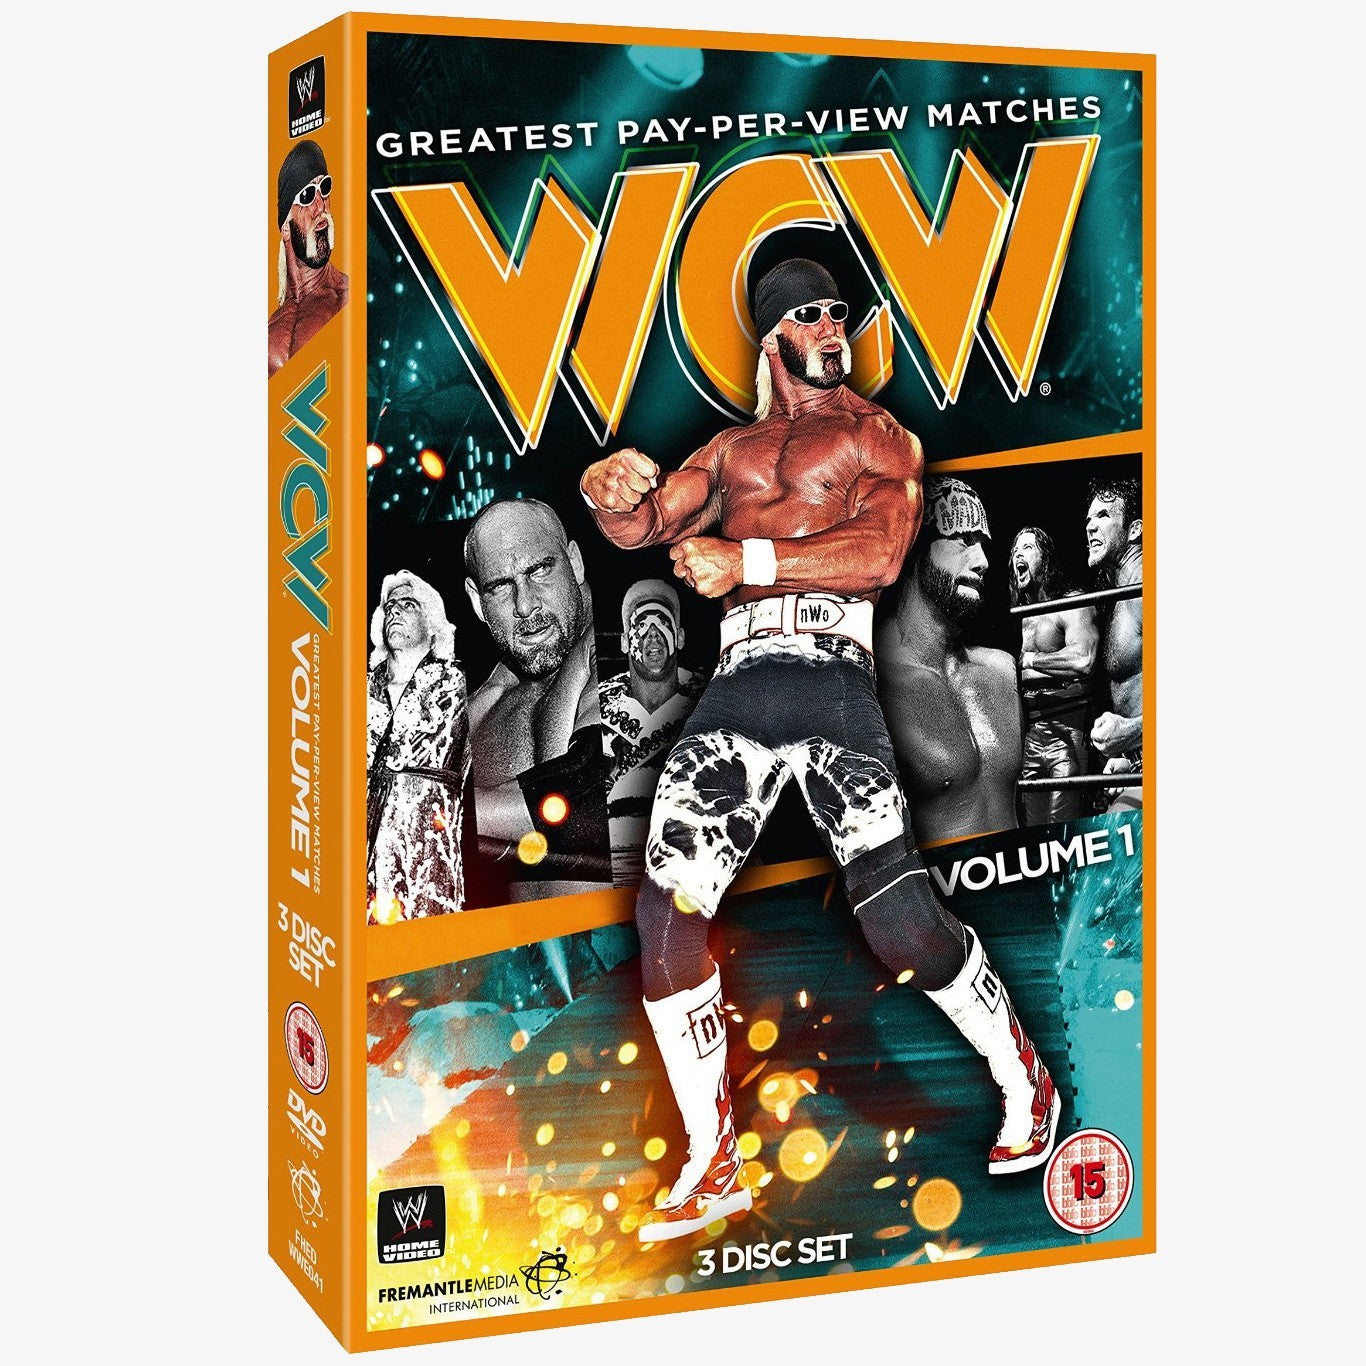 WCW's Greatest Pay-Per-View Matches - Volume 1 DVD